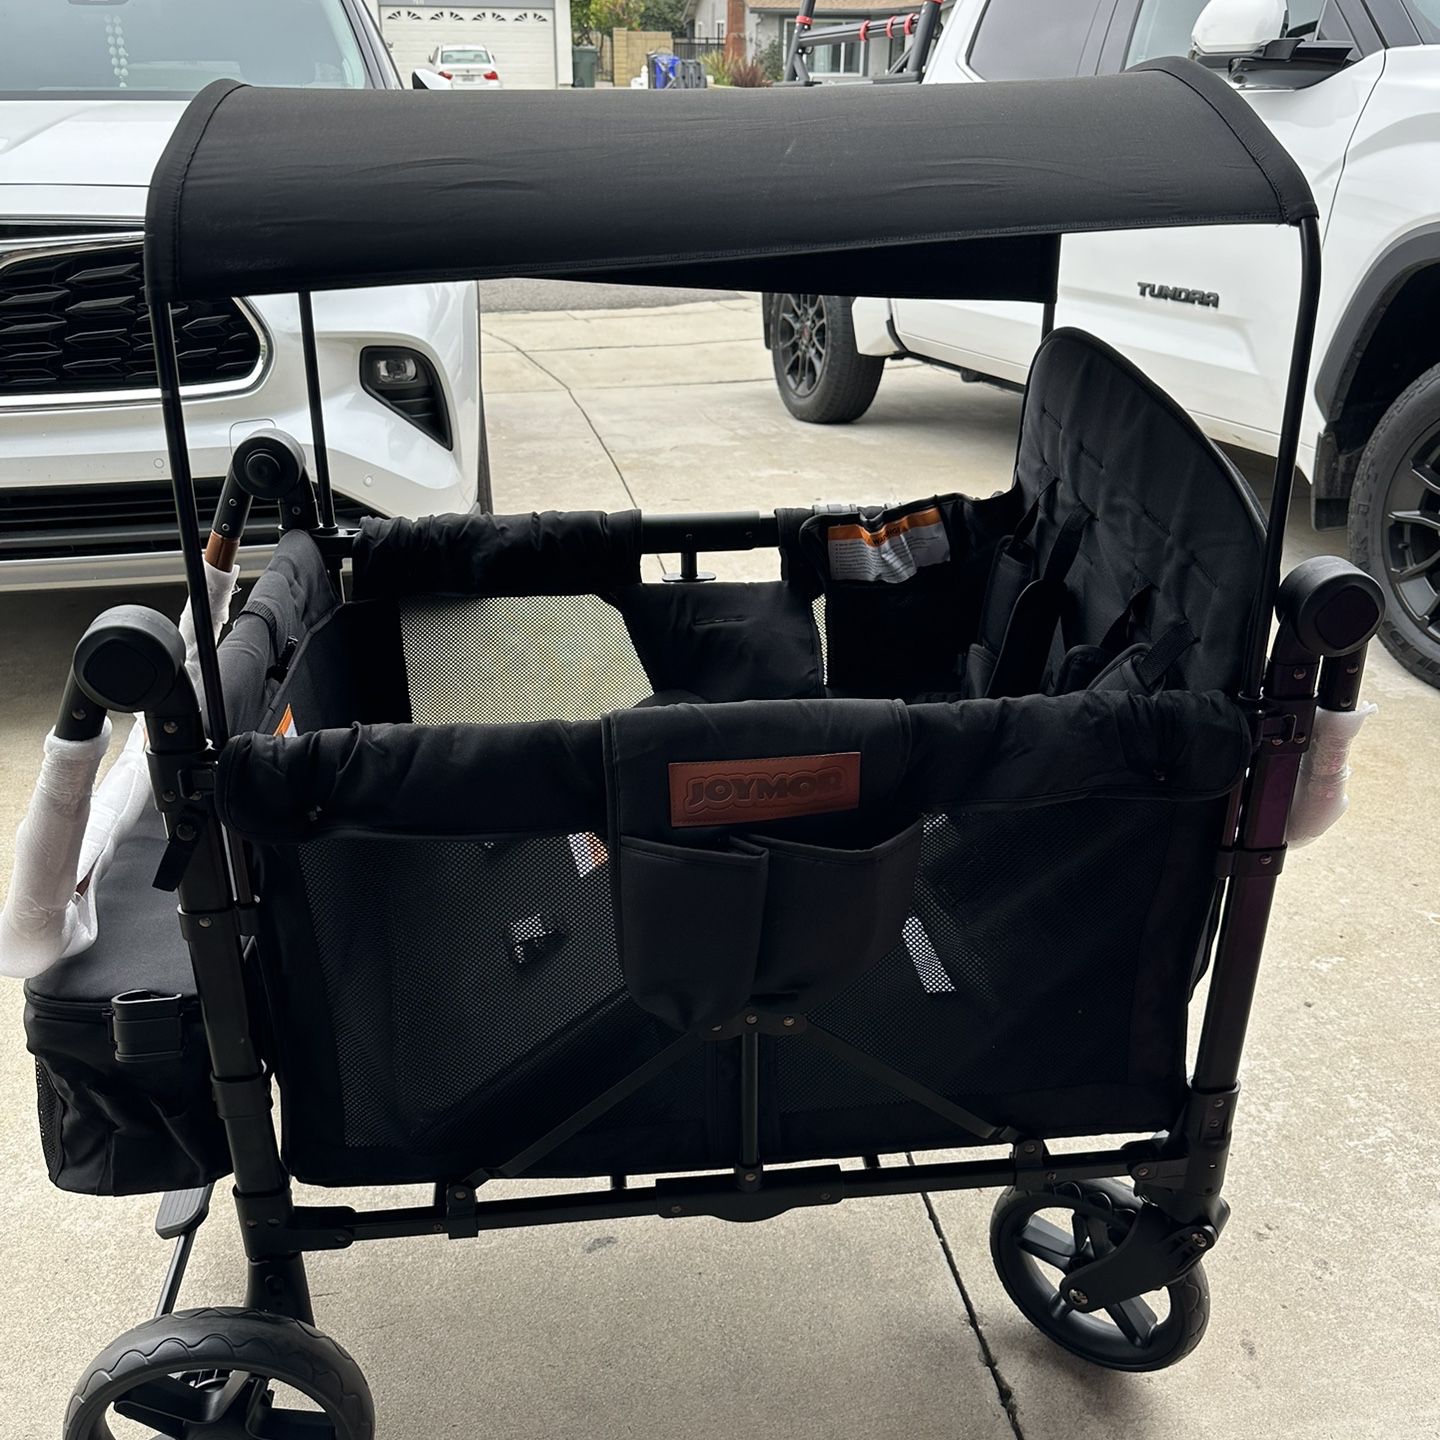  Double Stroller Wagon Featuring 2 High Face-to-Face Seats with 5-Point Harnesses, Adjustable Push Handle, and Height Adjustable UV